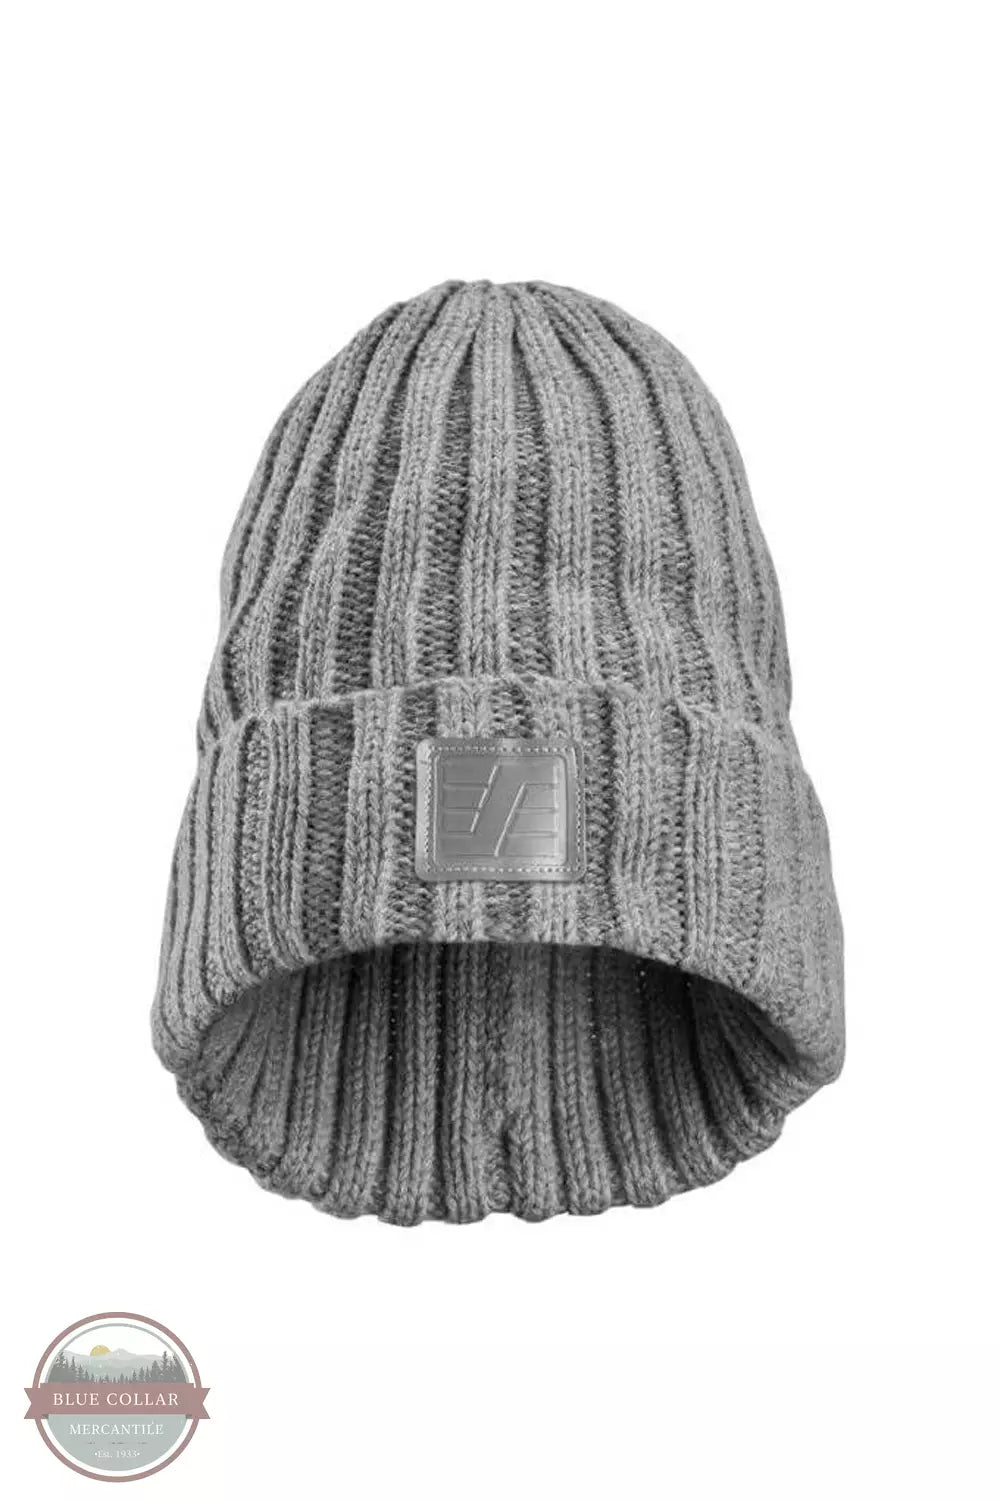 Snicker's Workwear 9027 2800 Ladies Reflective Beanie in Light Grey Front View